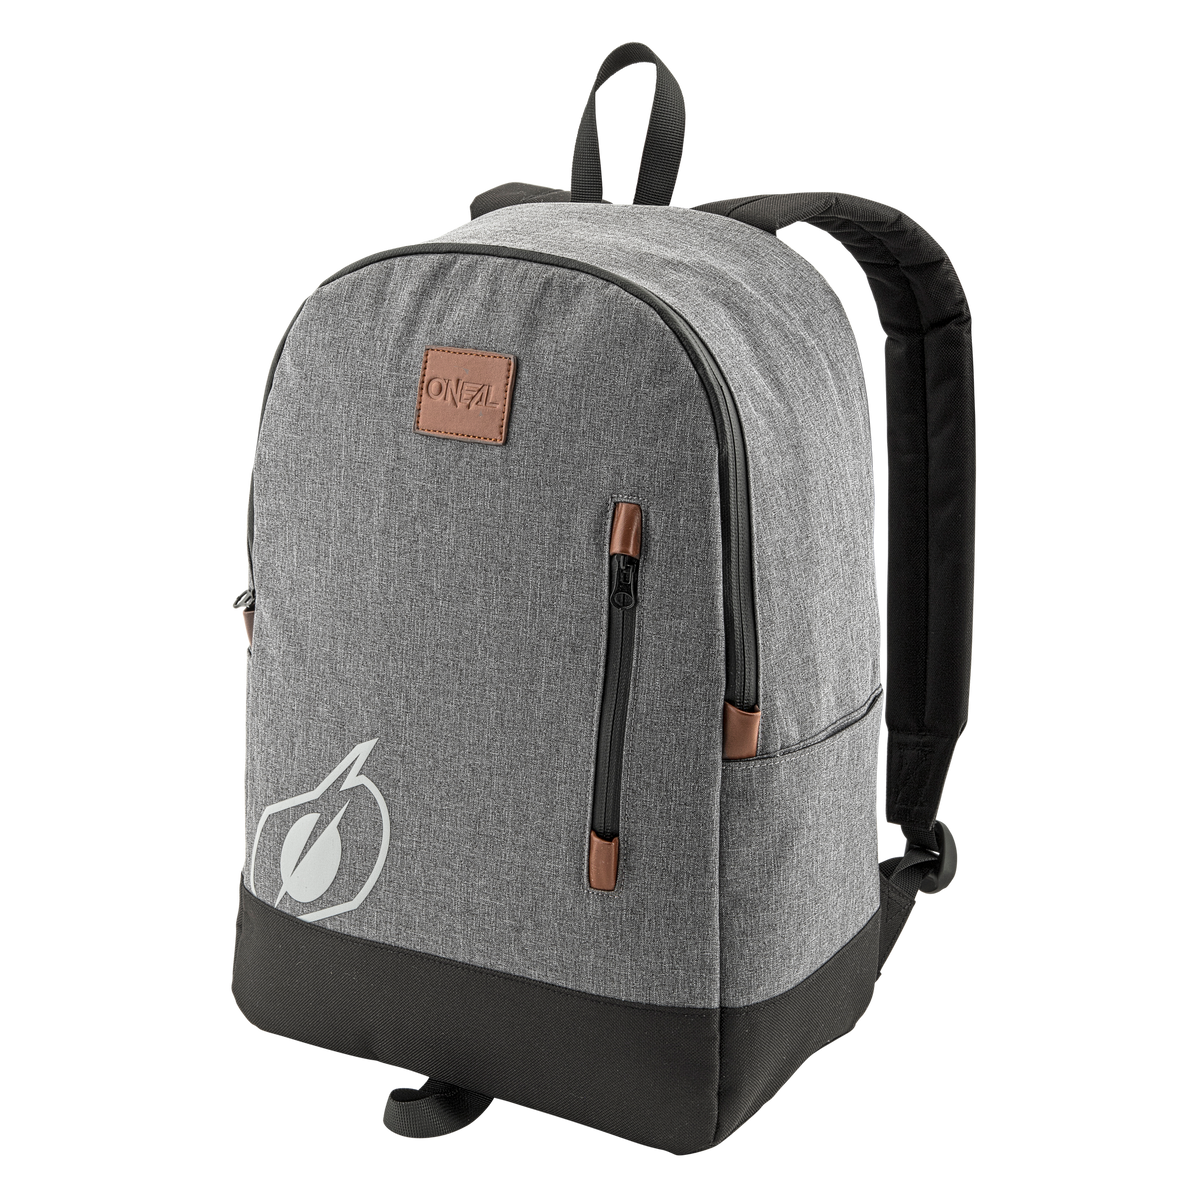 https://cdn.oneal.eu/assets/importedProductImages/ACCESSORIES/BACKPACK/gray/2019_ONeal_BACKPACK_gray.png